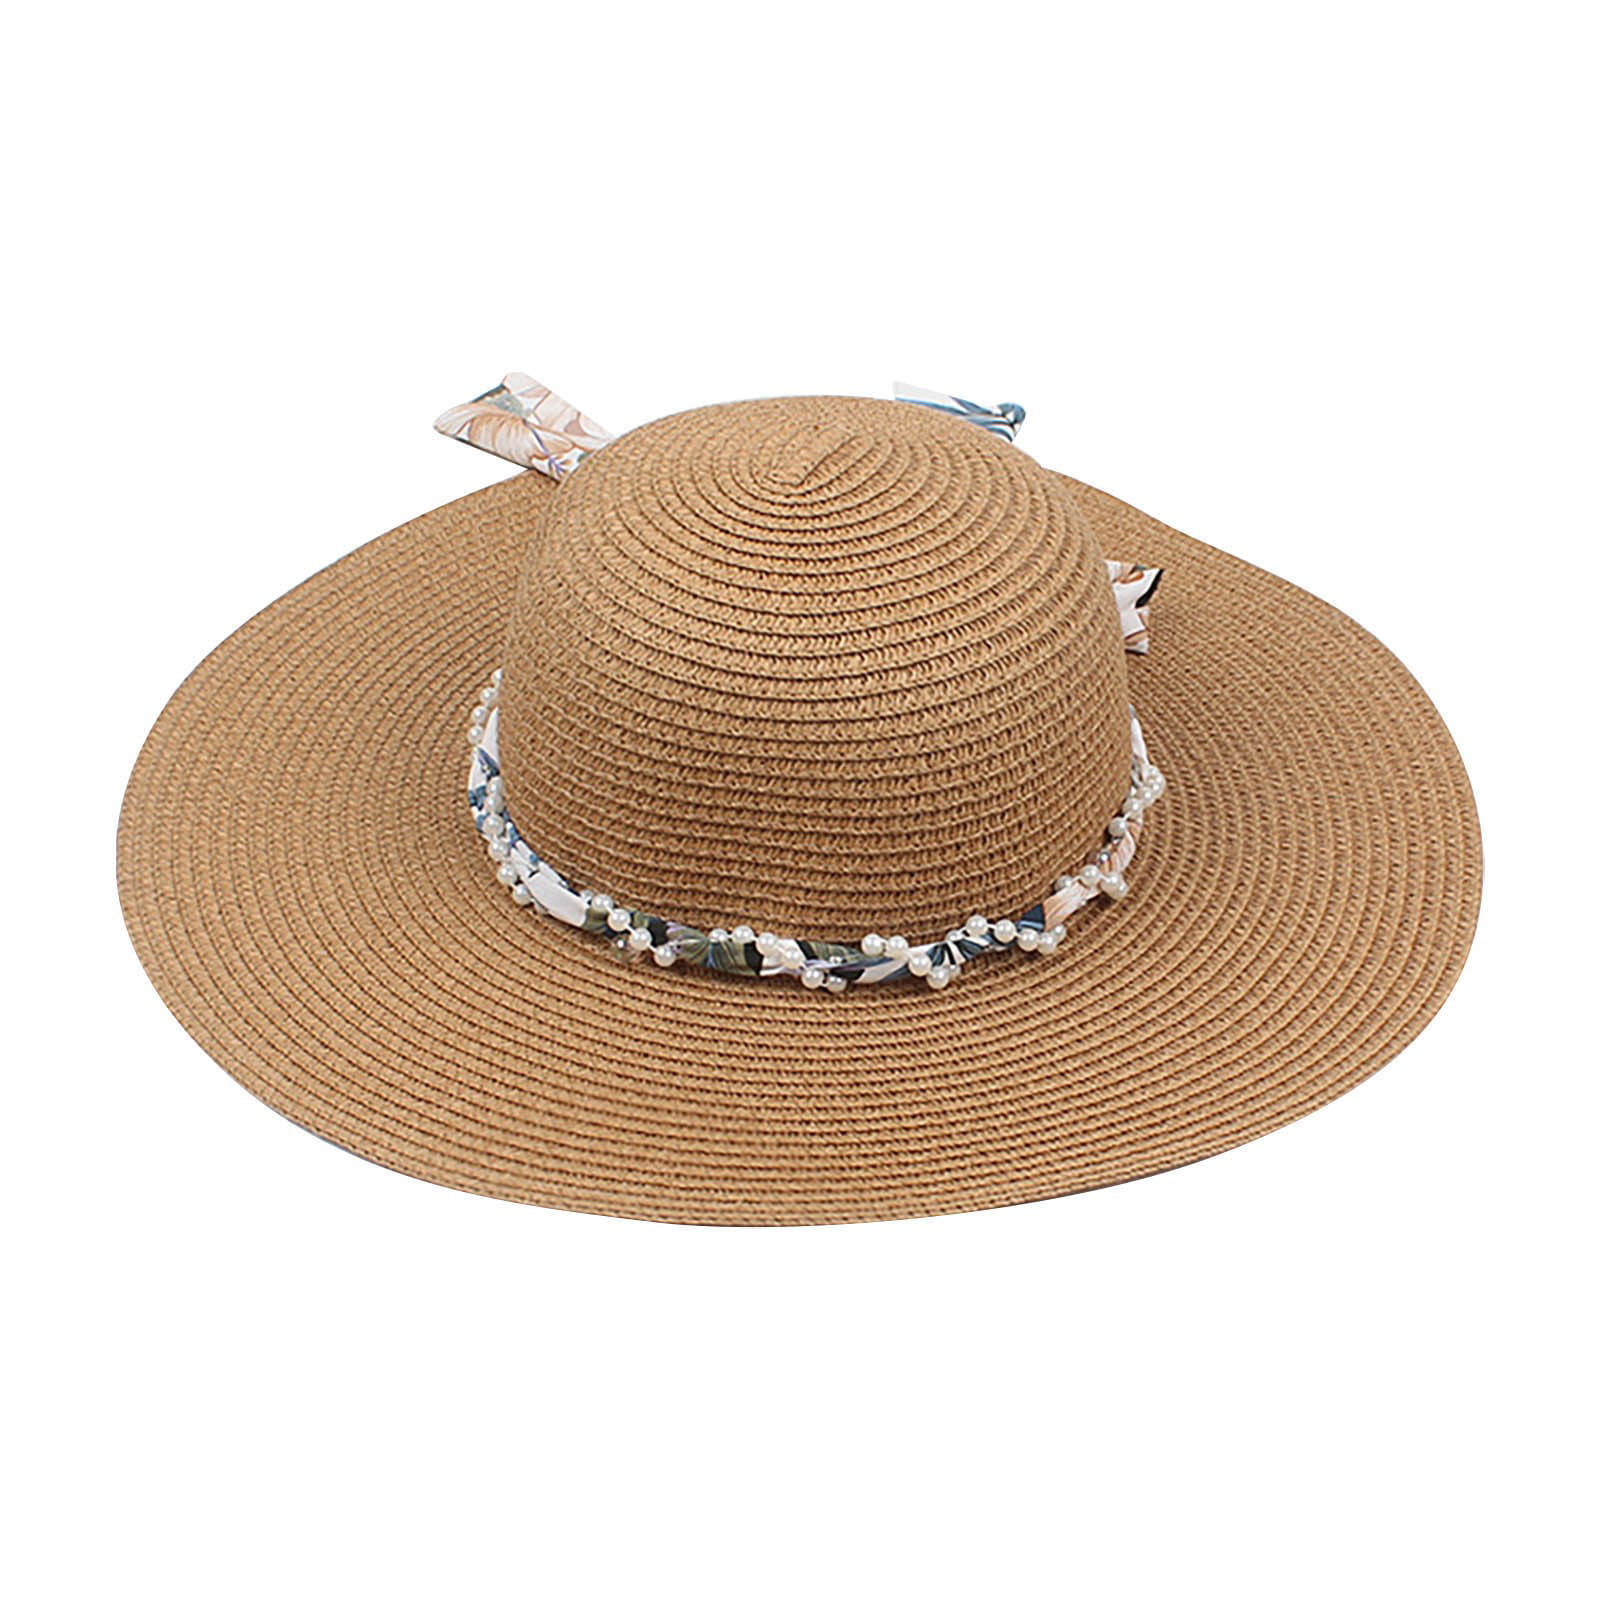 Mchoice Wide Brim Beach Hats for Women Adjustable Floppy Sun Hats Foldable Straw  Hat UV Protection Summer Hat UPF 50+ on Clearance 